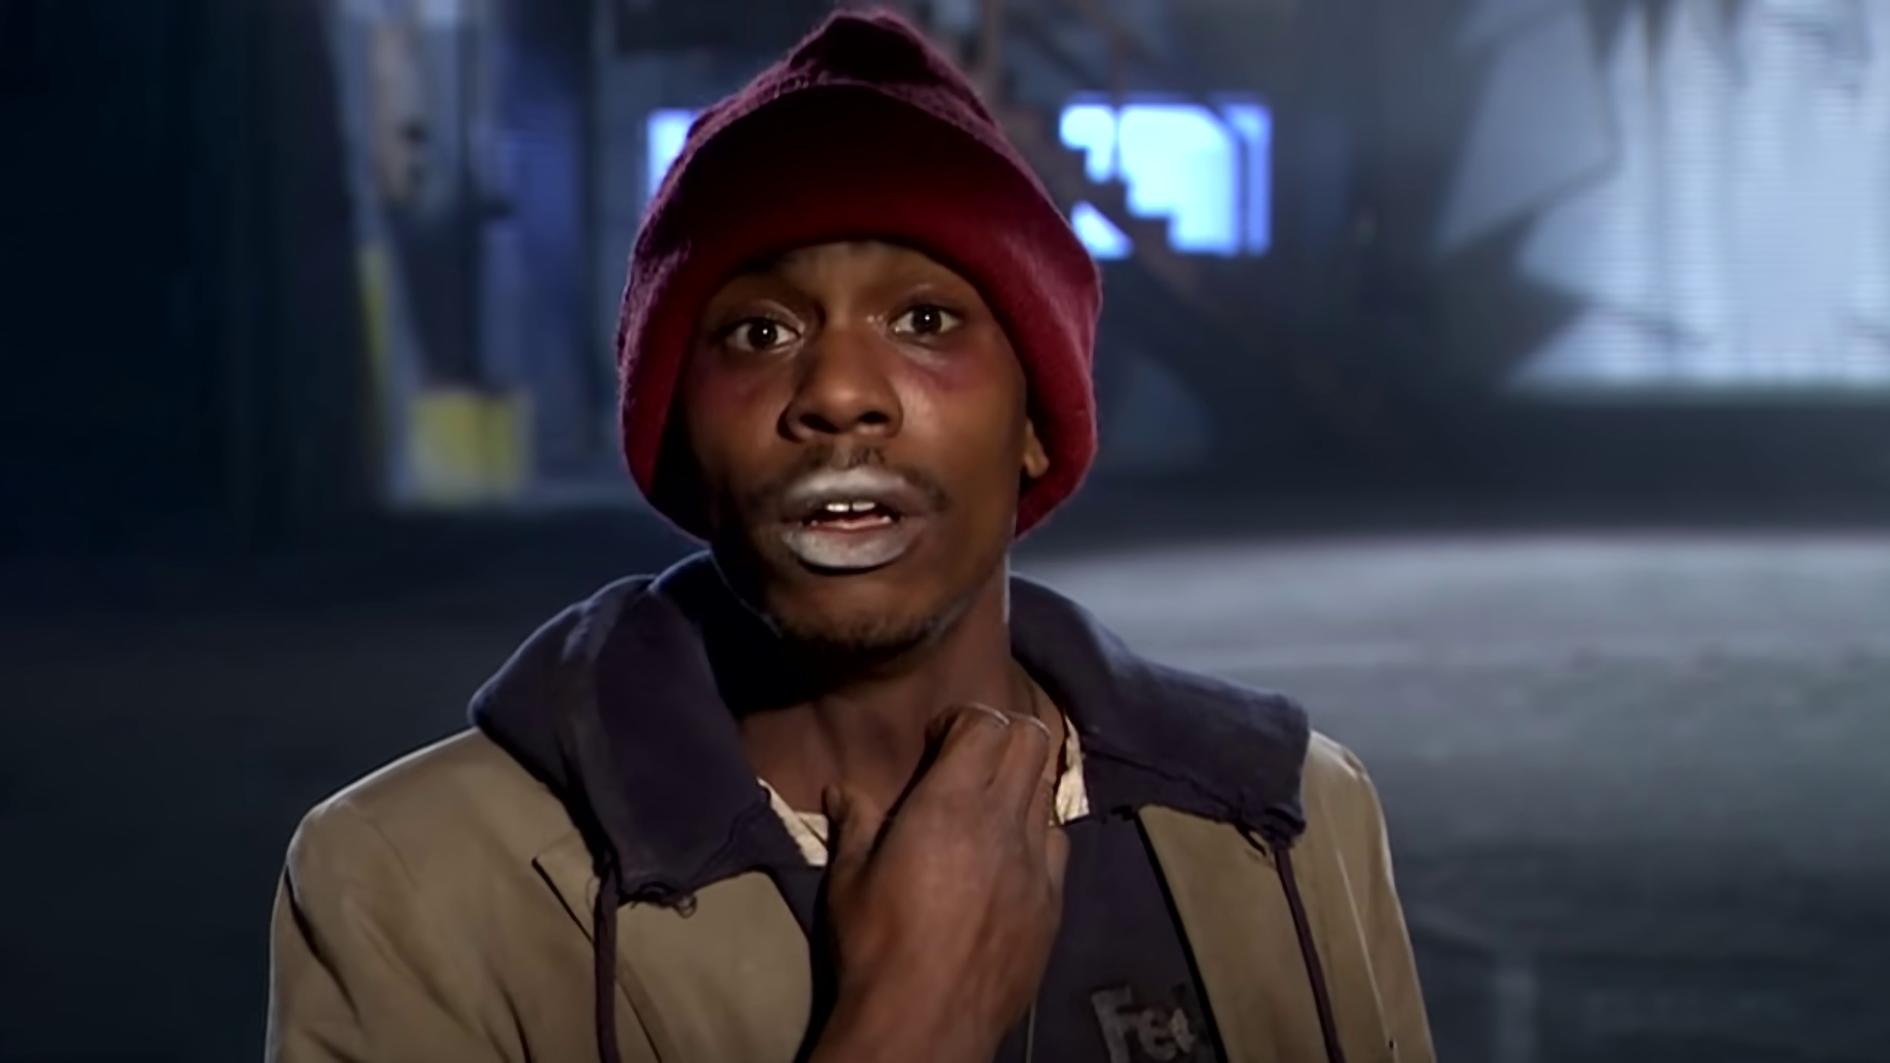 High Quality Dave Chappelle as Tyrone Biggums the Crackhead HD Widescreen Blank Meme Template